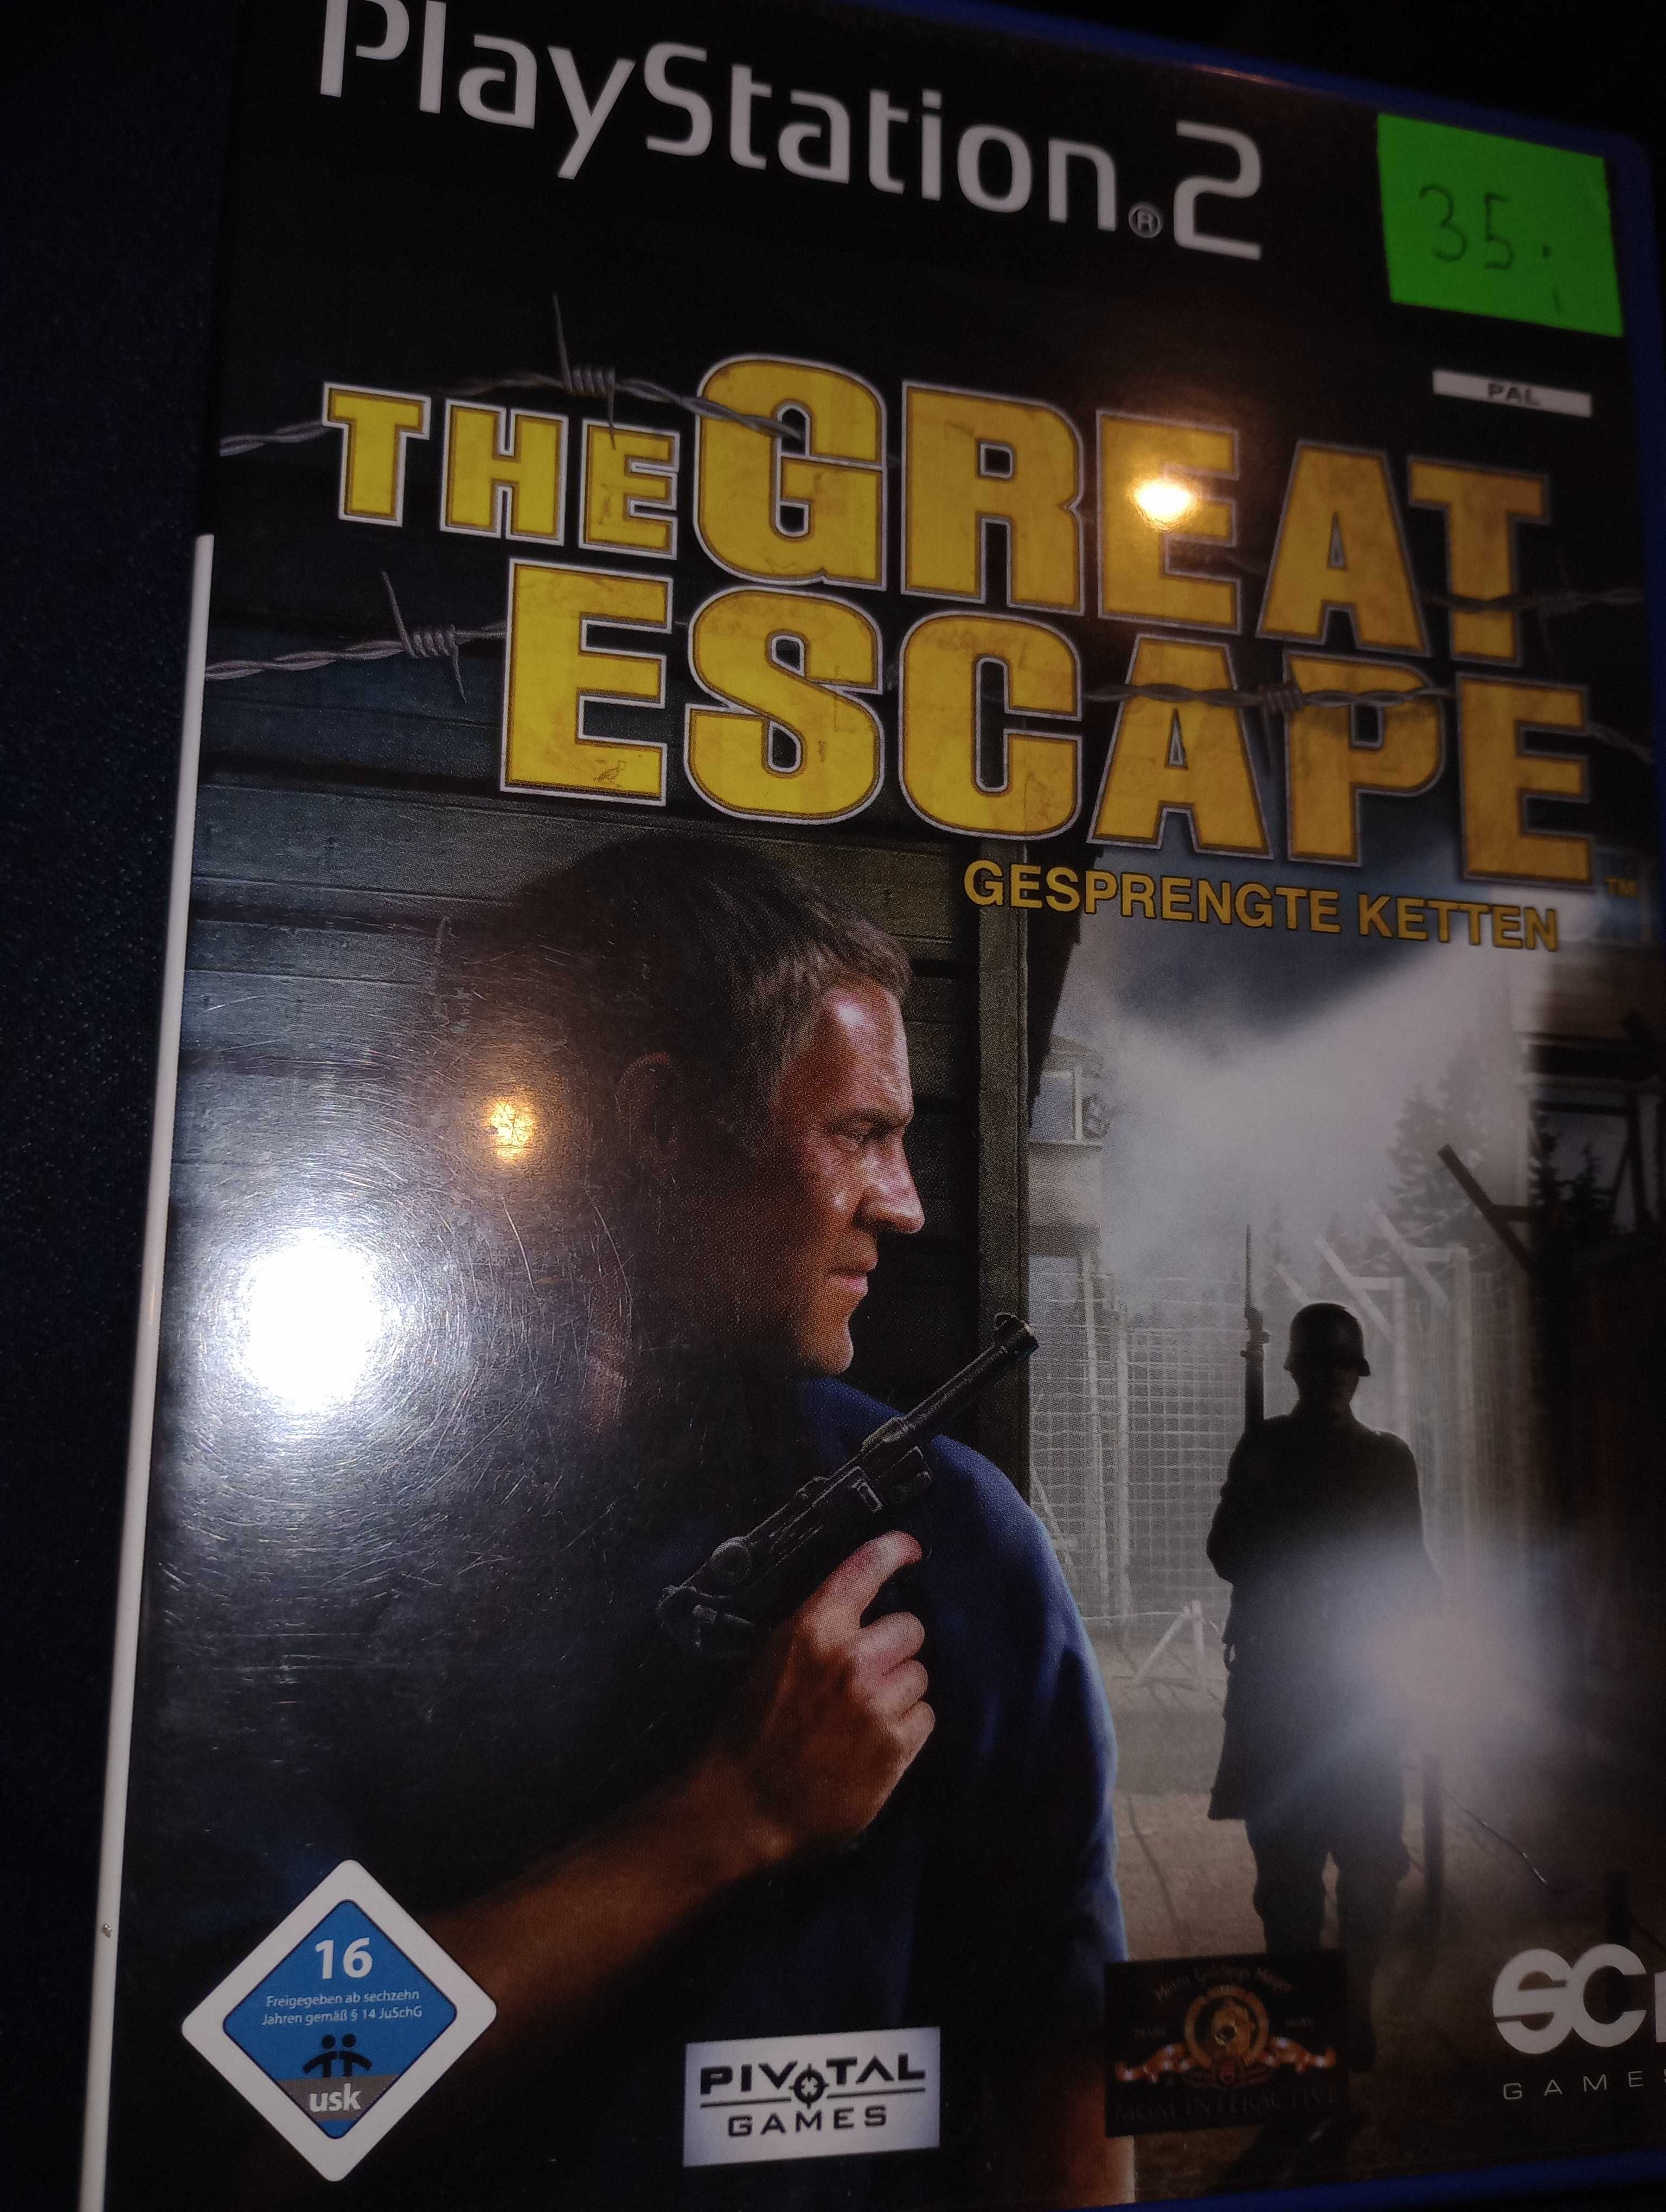 Ps2 The Gresy Escape playstation 2